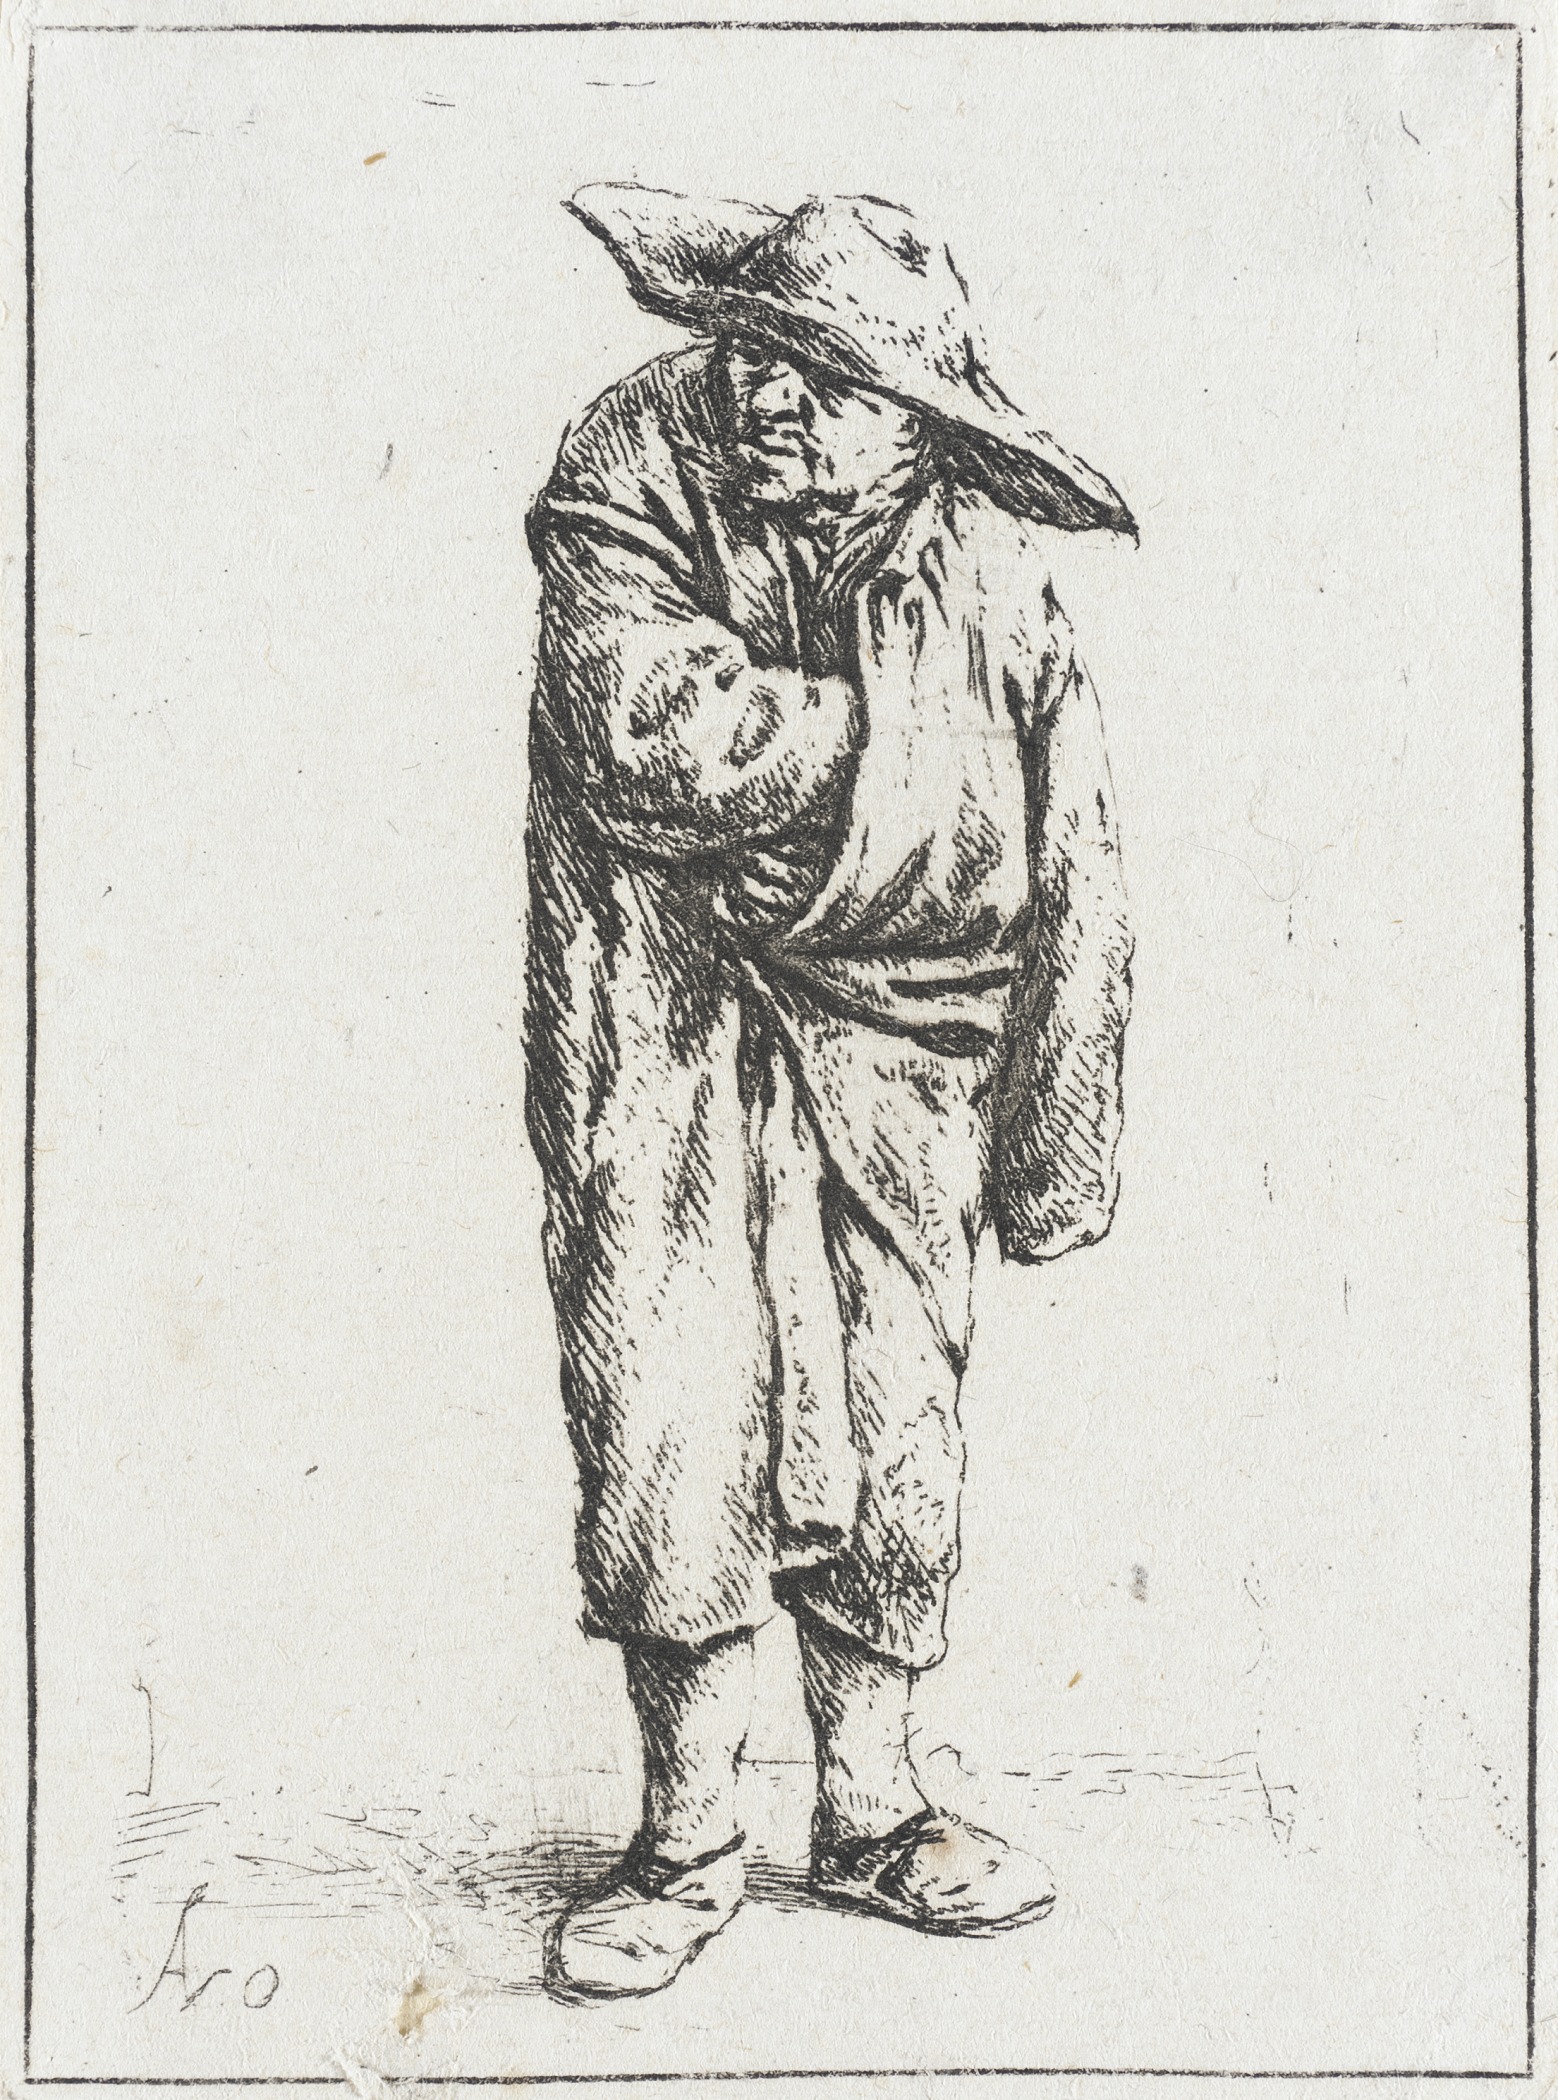 an old drawing of a person with a hat